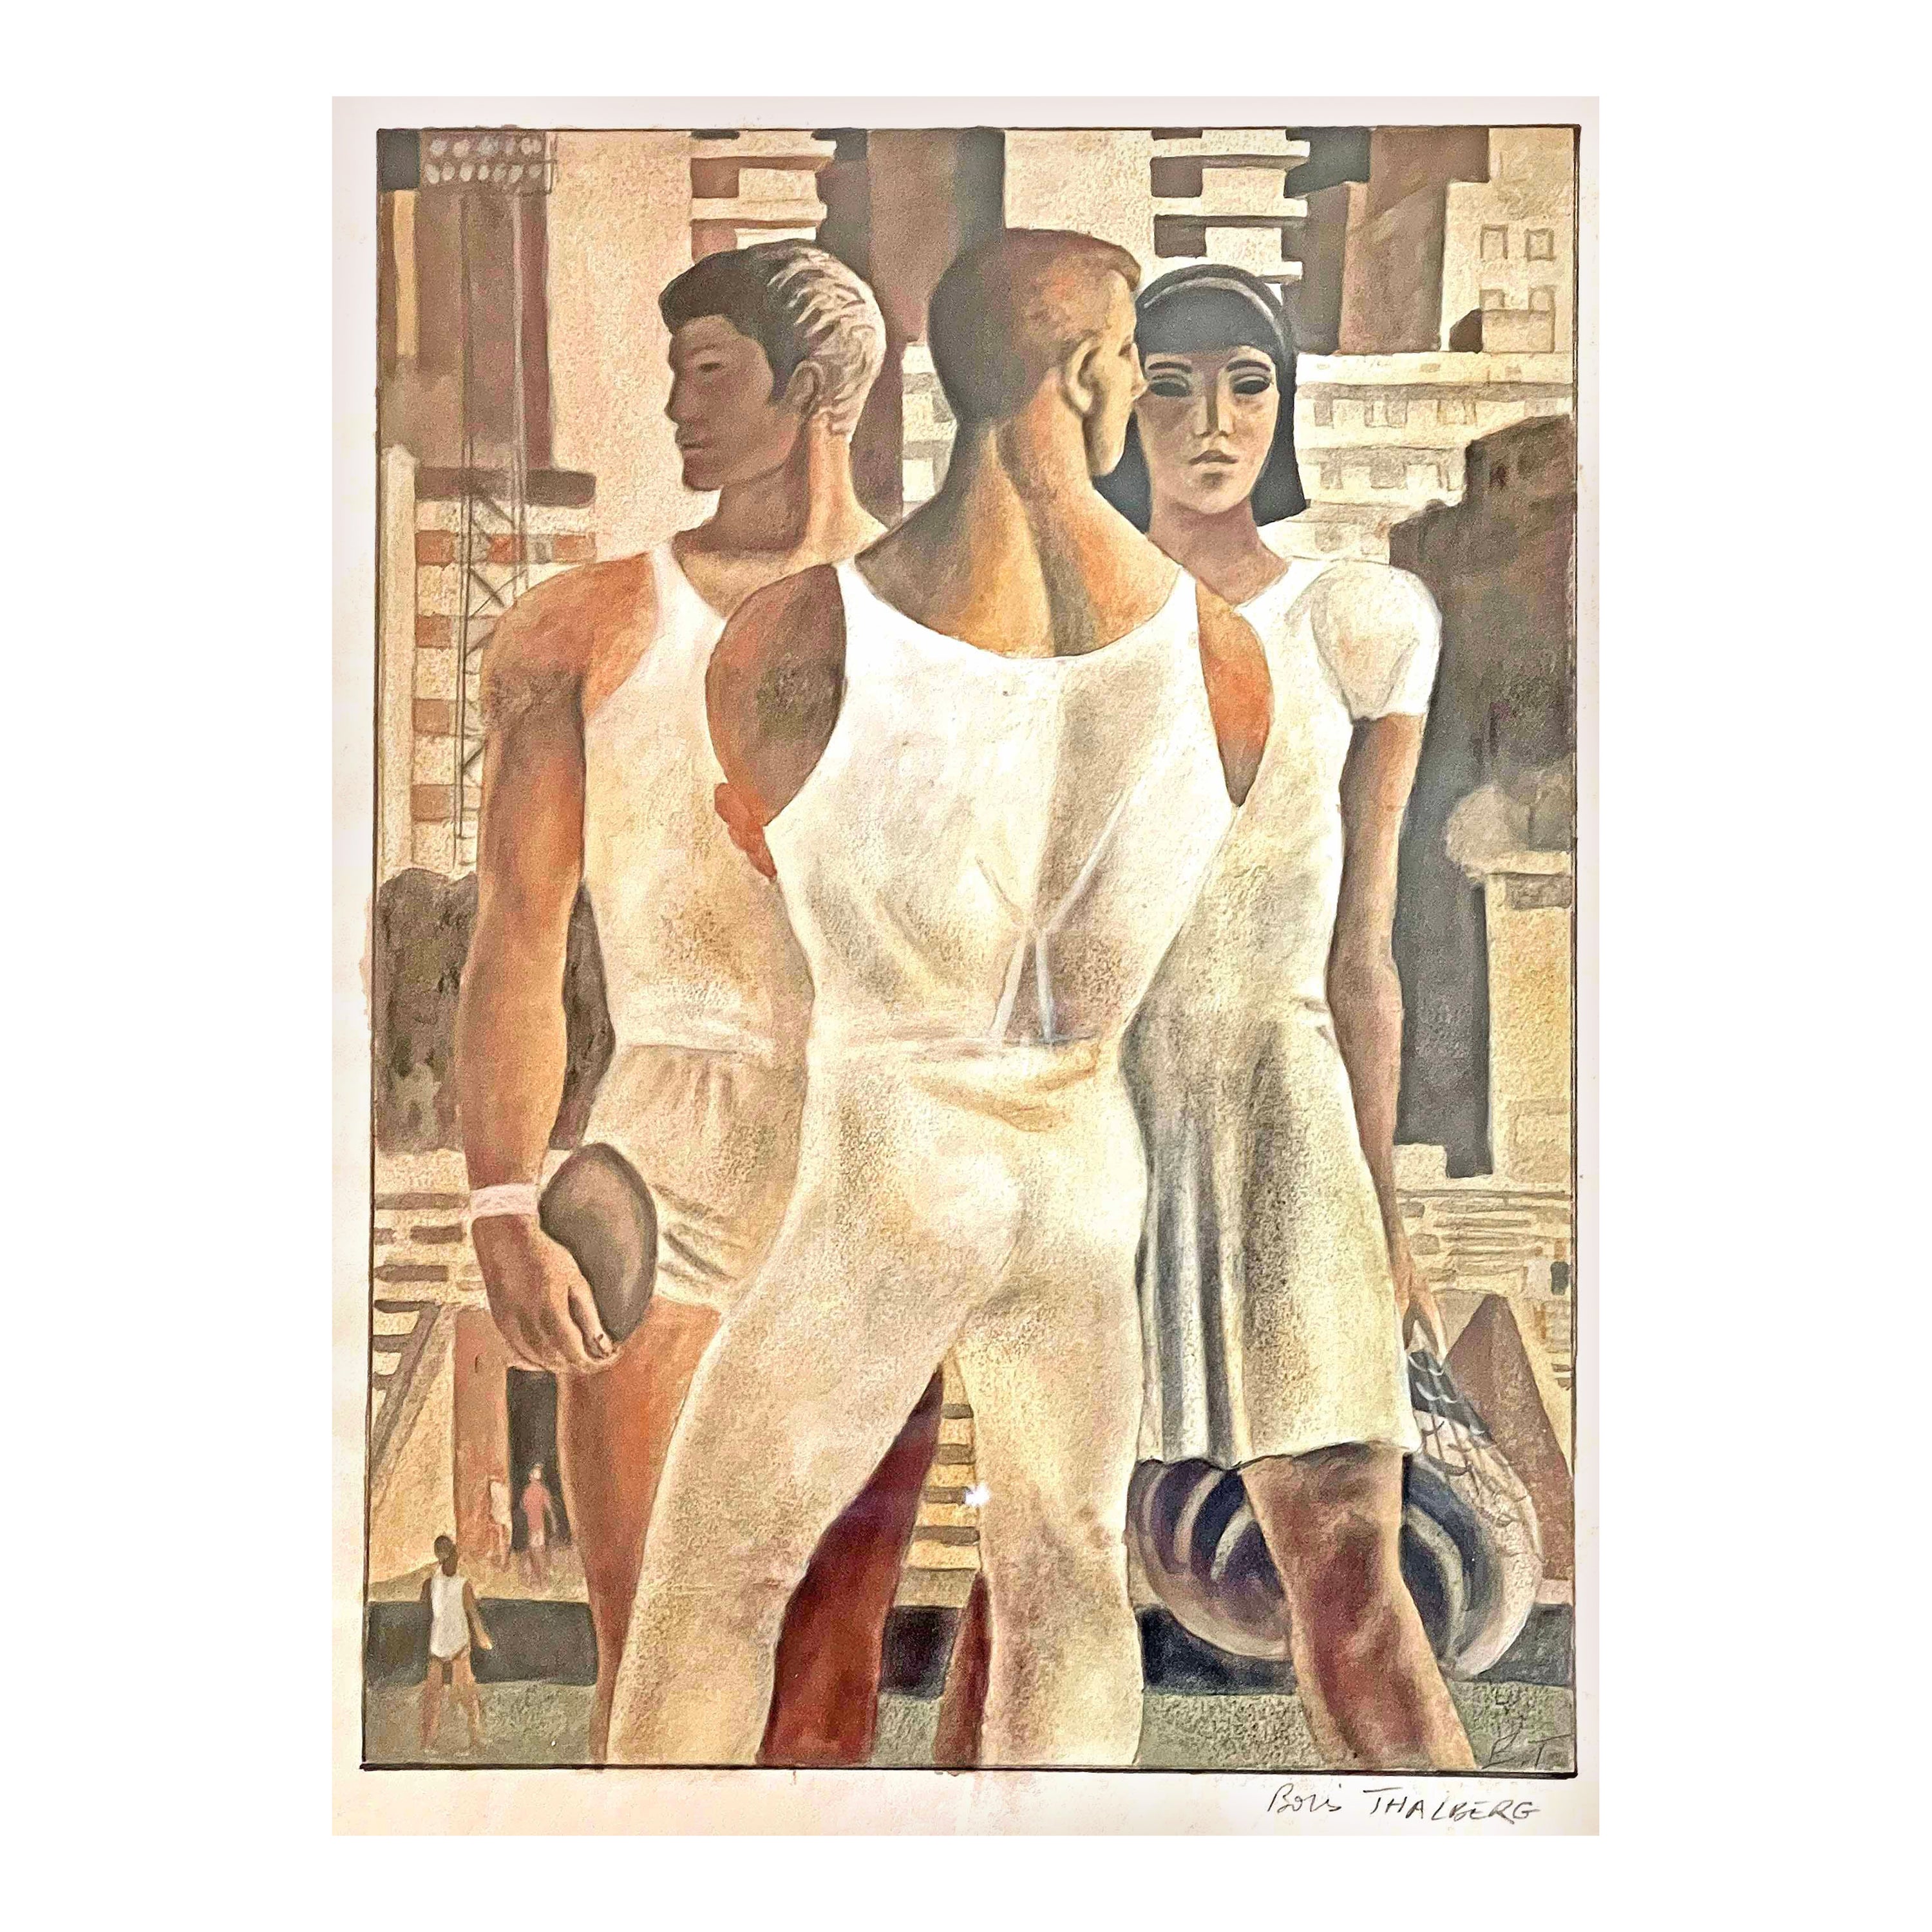 "The Gymnasts, " Important Mid-Century Painting of Soviet Athletes by Talberg